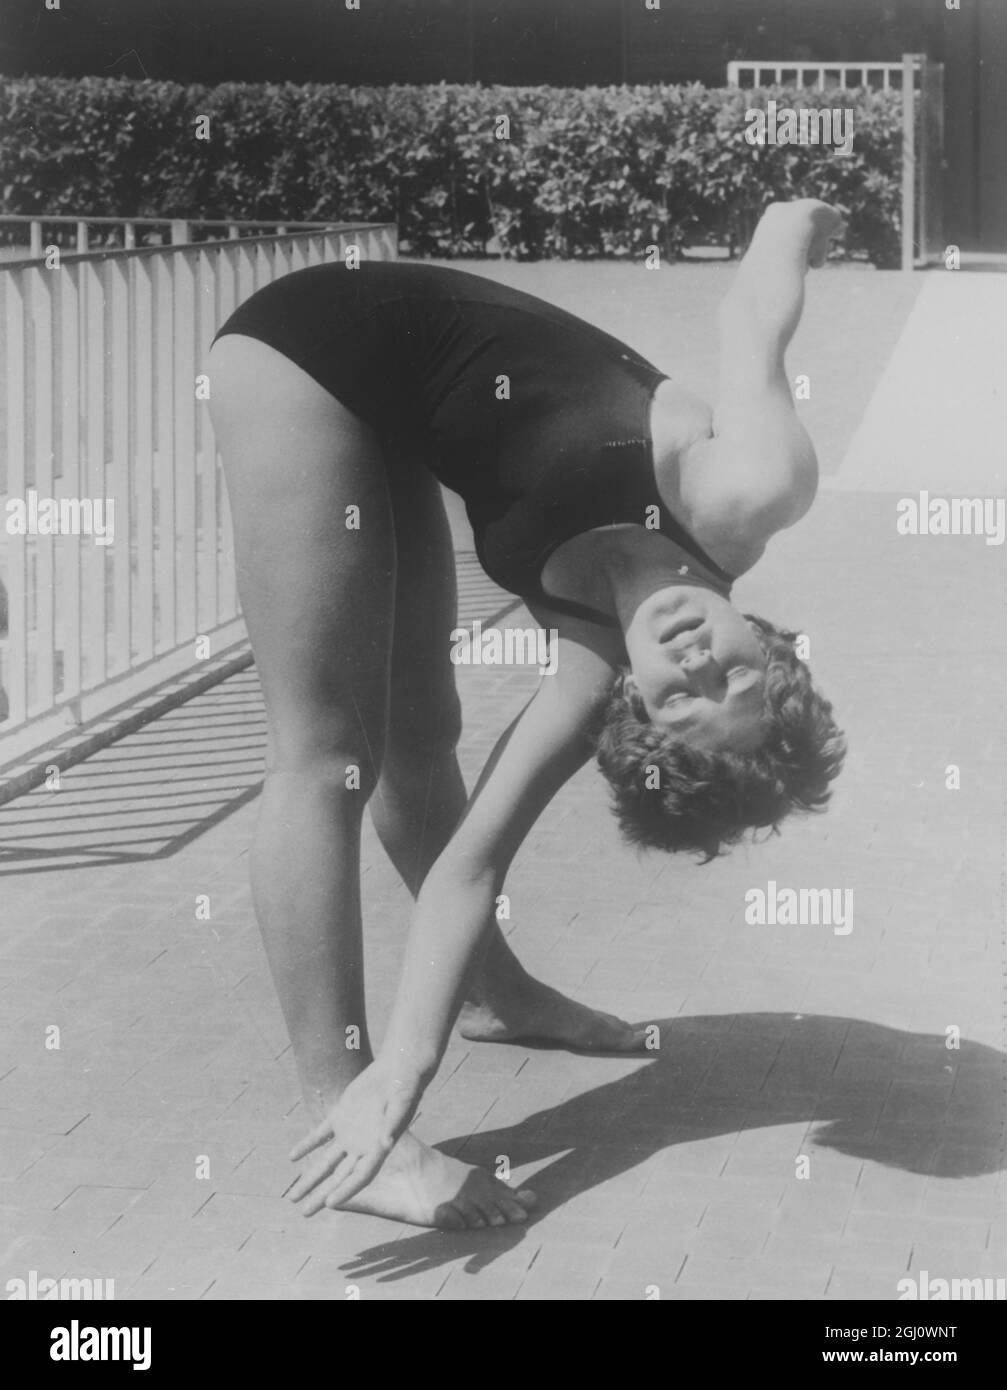 SCHWIMMEN RANWELL LAURA SOUTH AFRICAN AM POOL 19. AUGUST 1960 Stockfoto